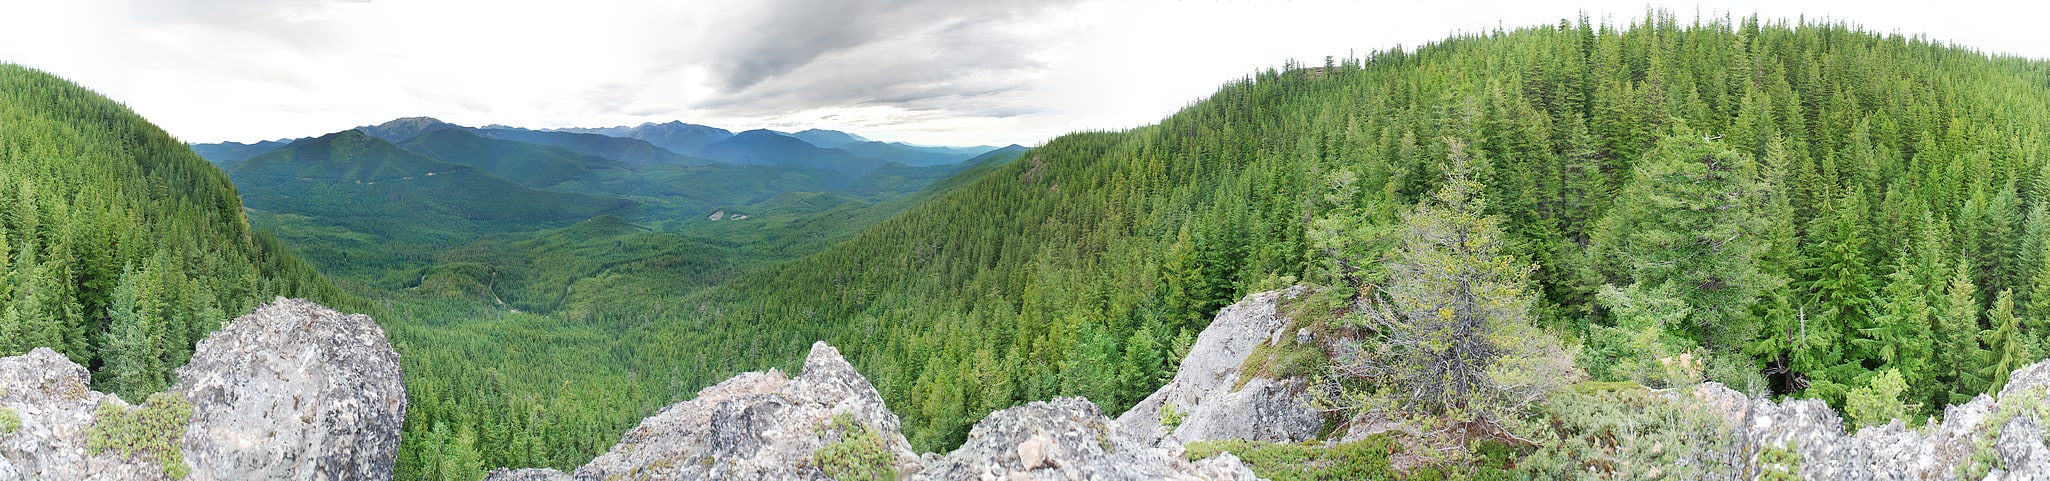 Olympic National Forest, Stany Zjednoczone